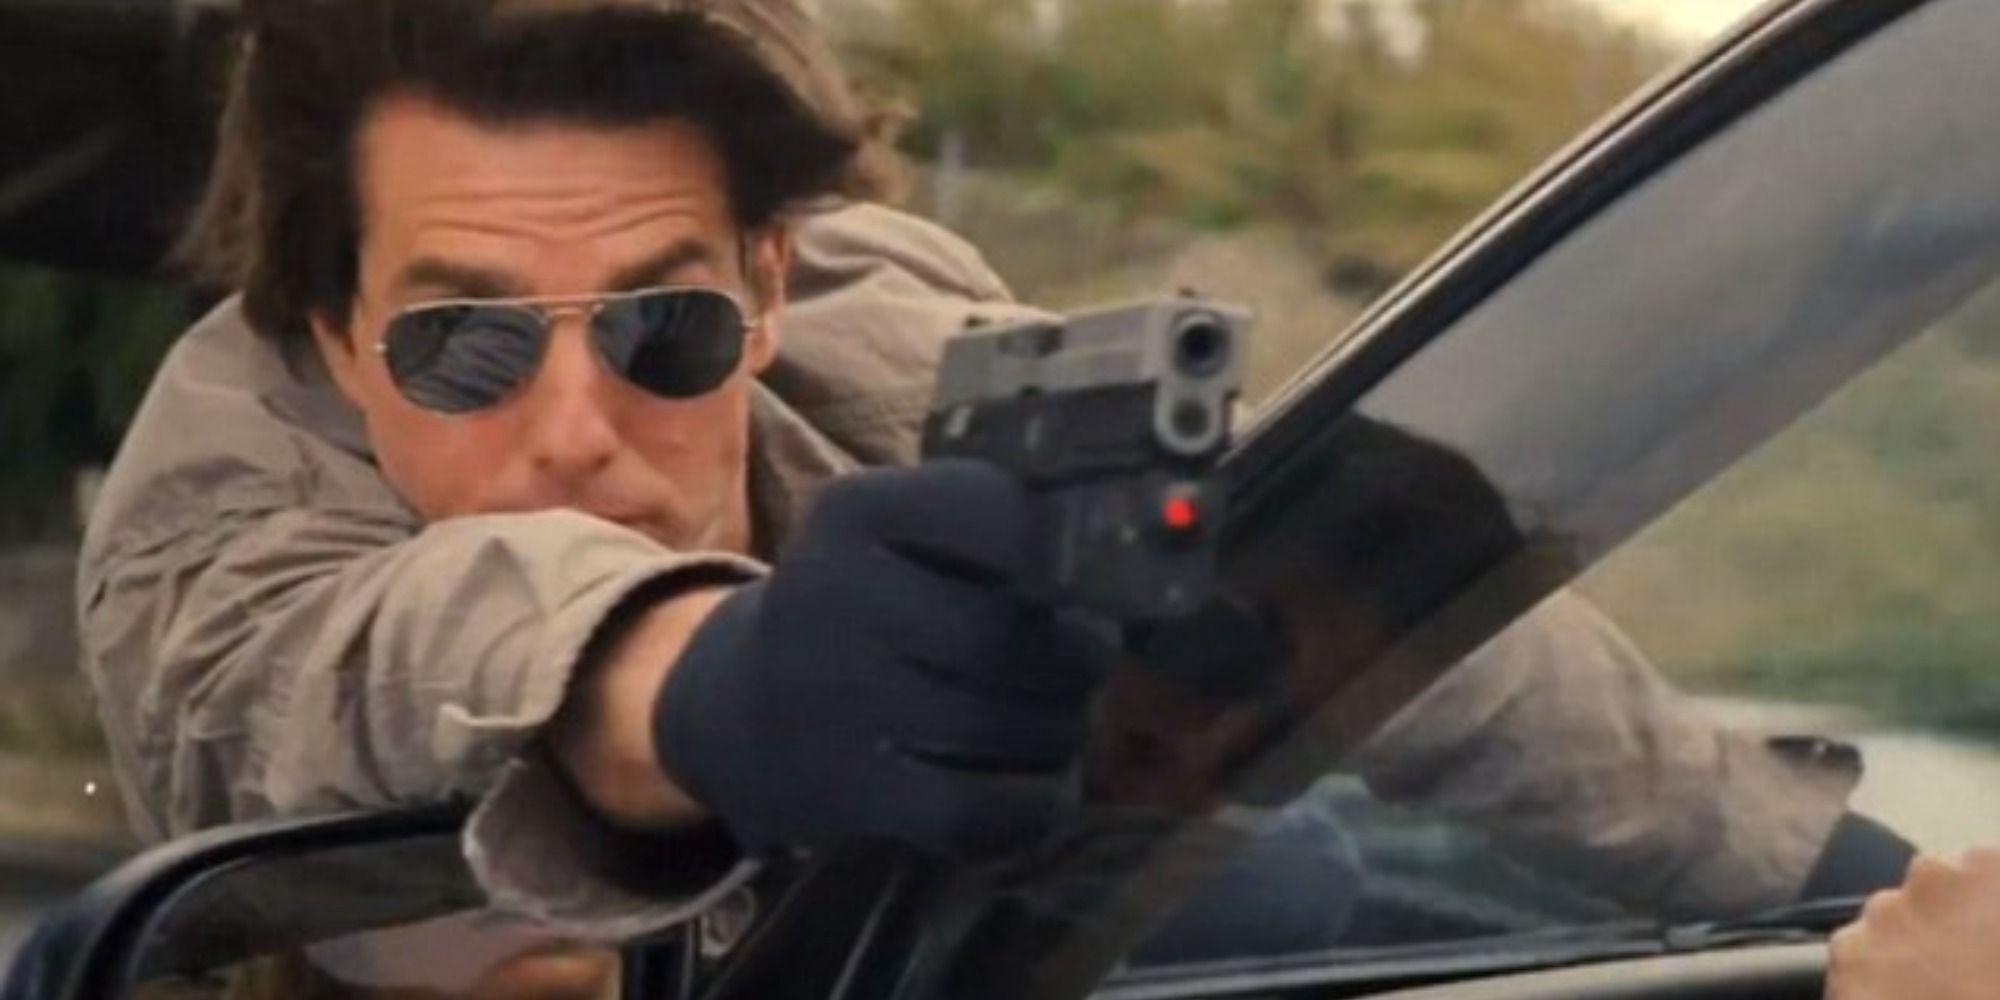 Tom Cruise hanging on the front of the car while aiming a gun 